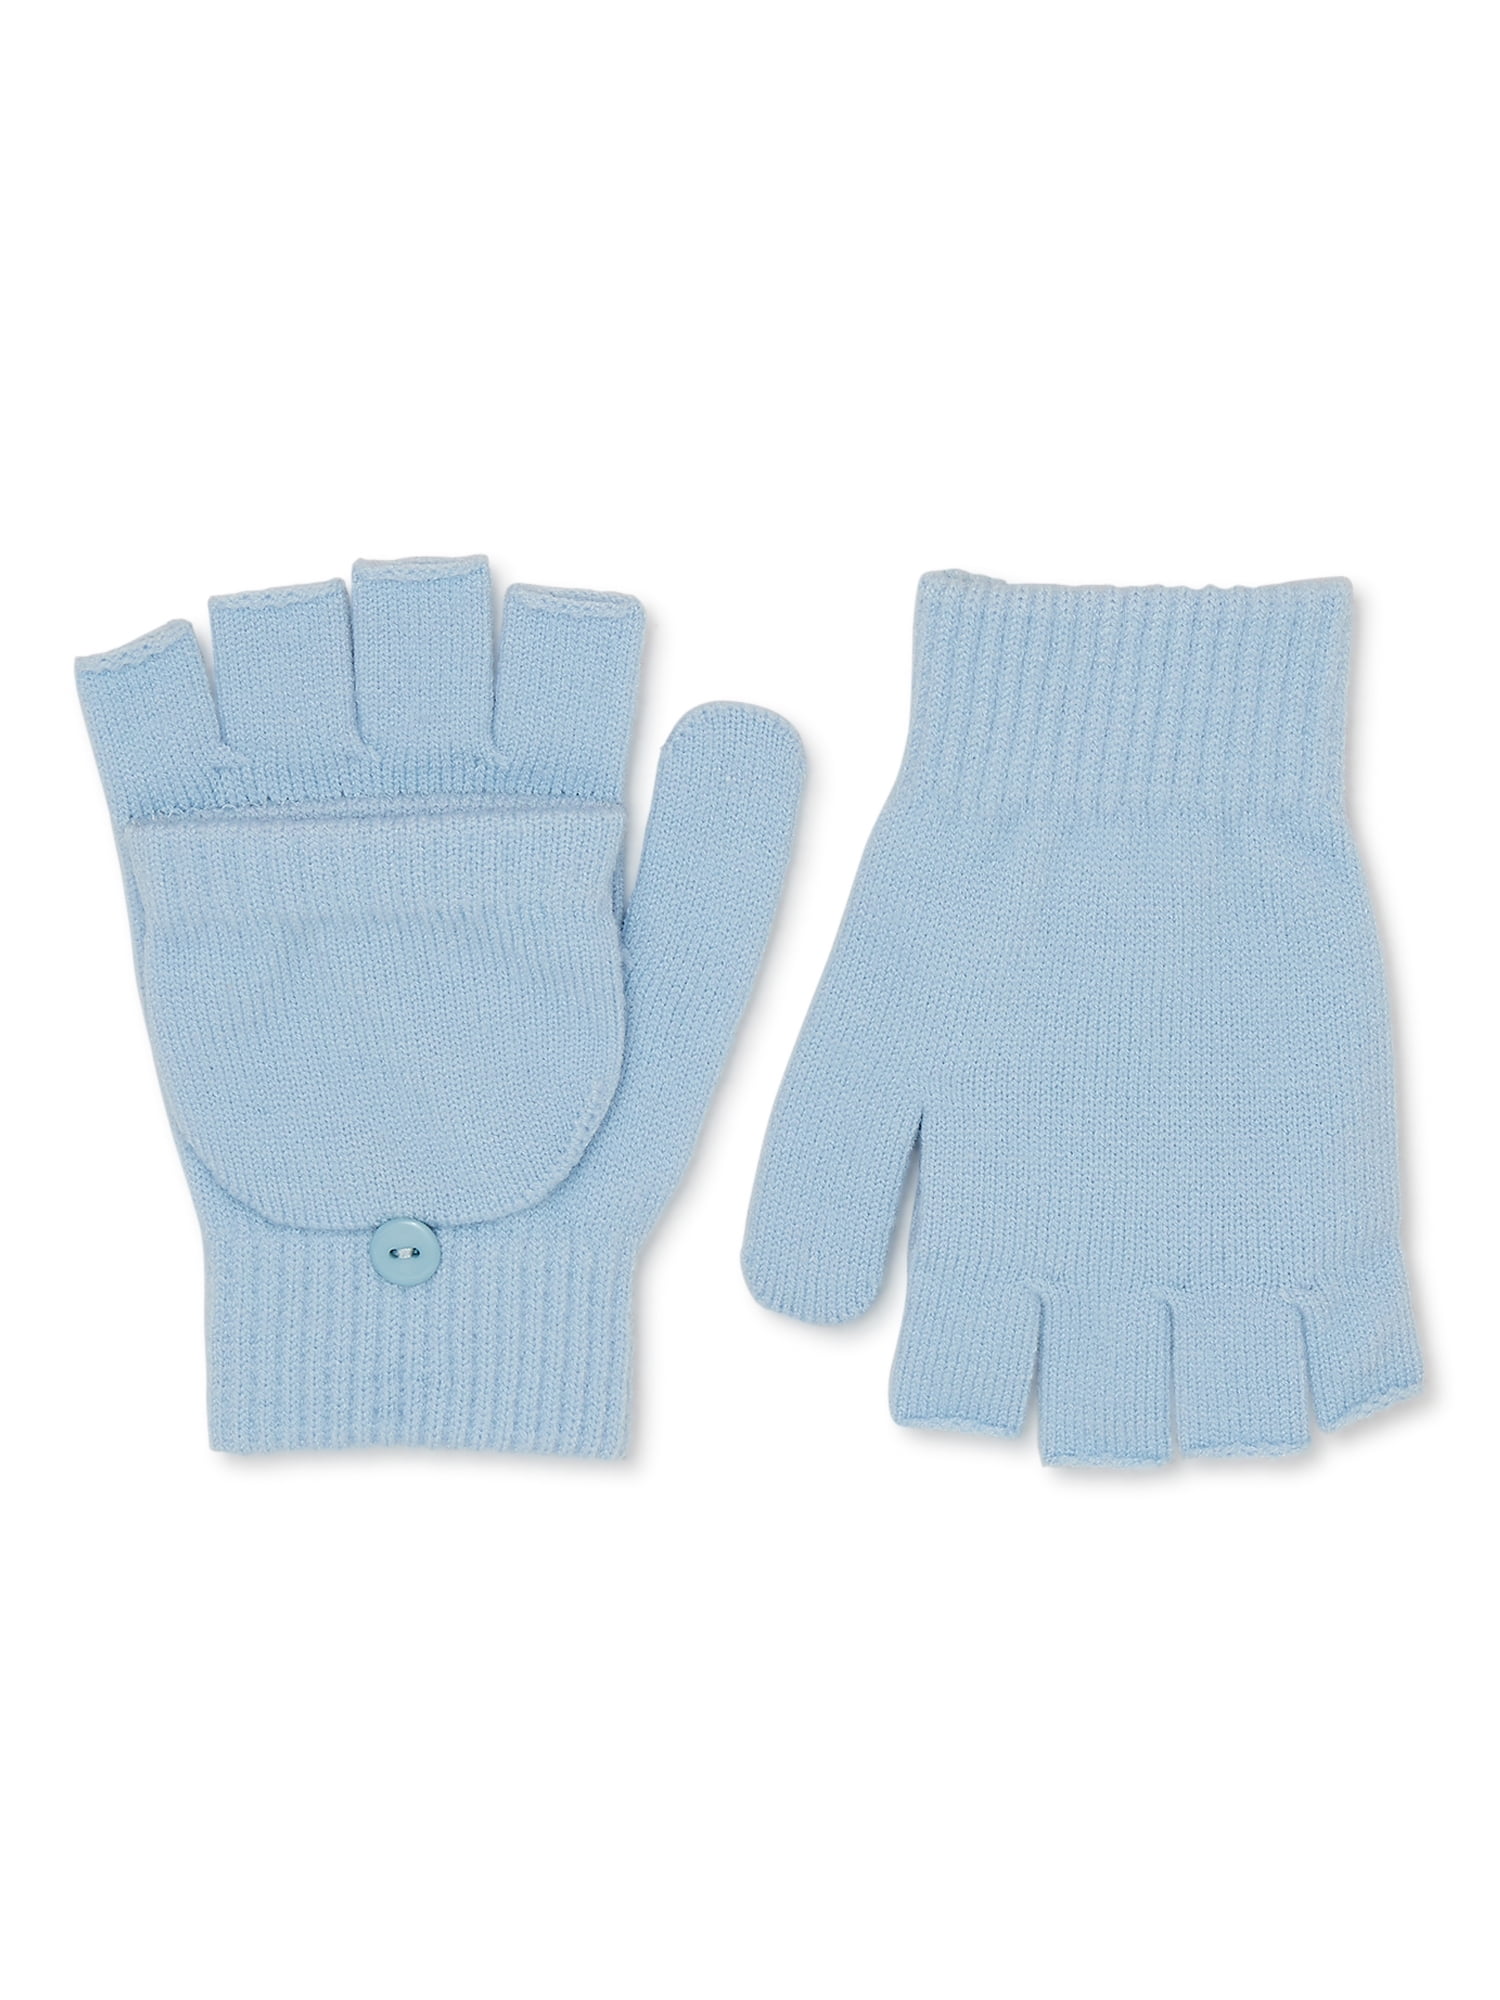 Dropship AMZ Blue Gray Knit Gloves 10 L Size. Pack Of 480 Work